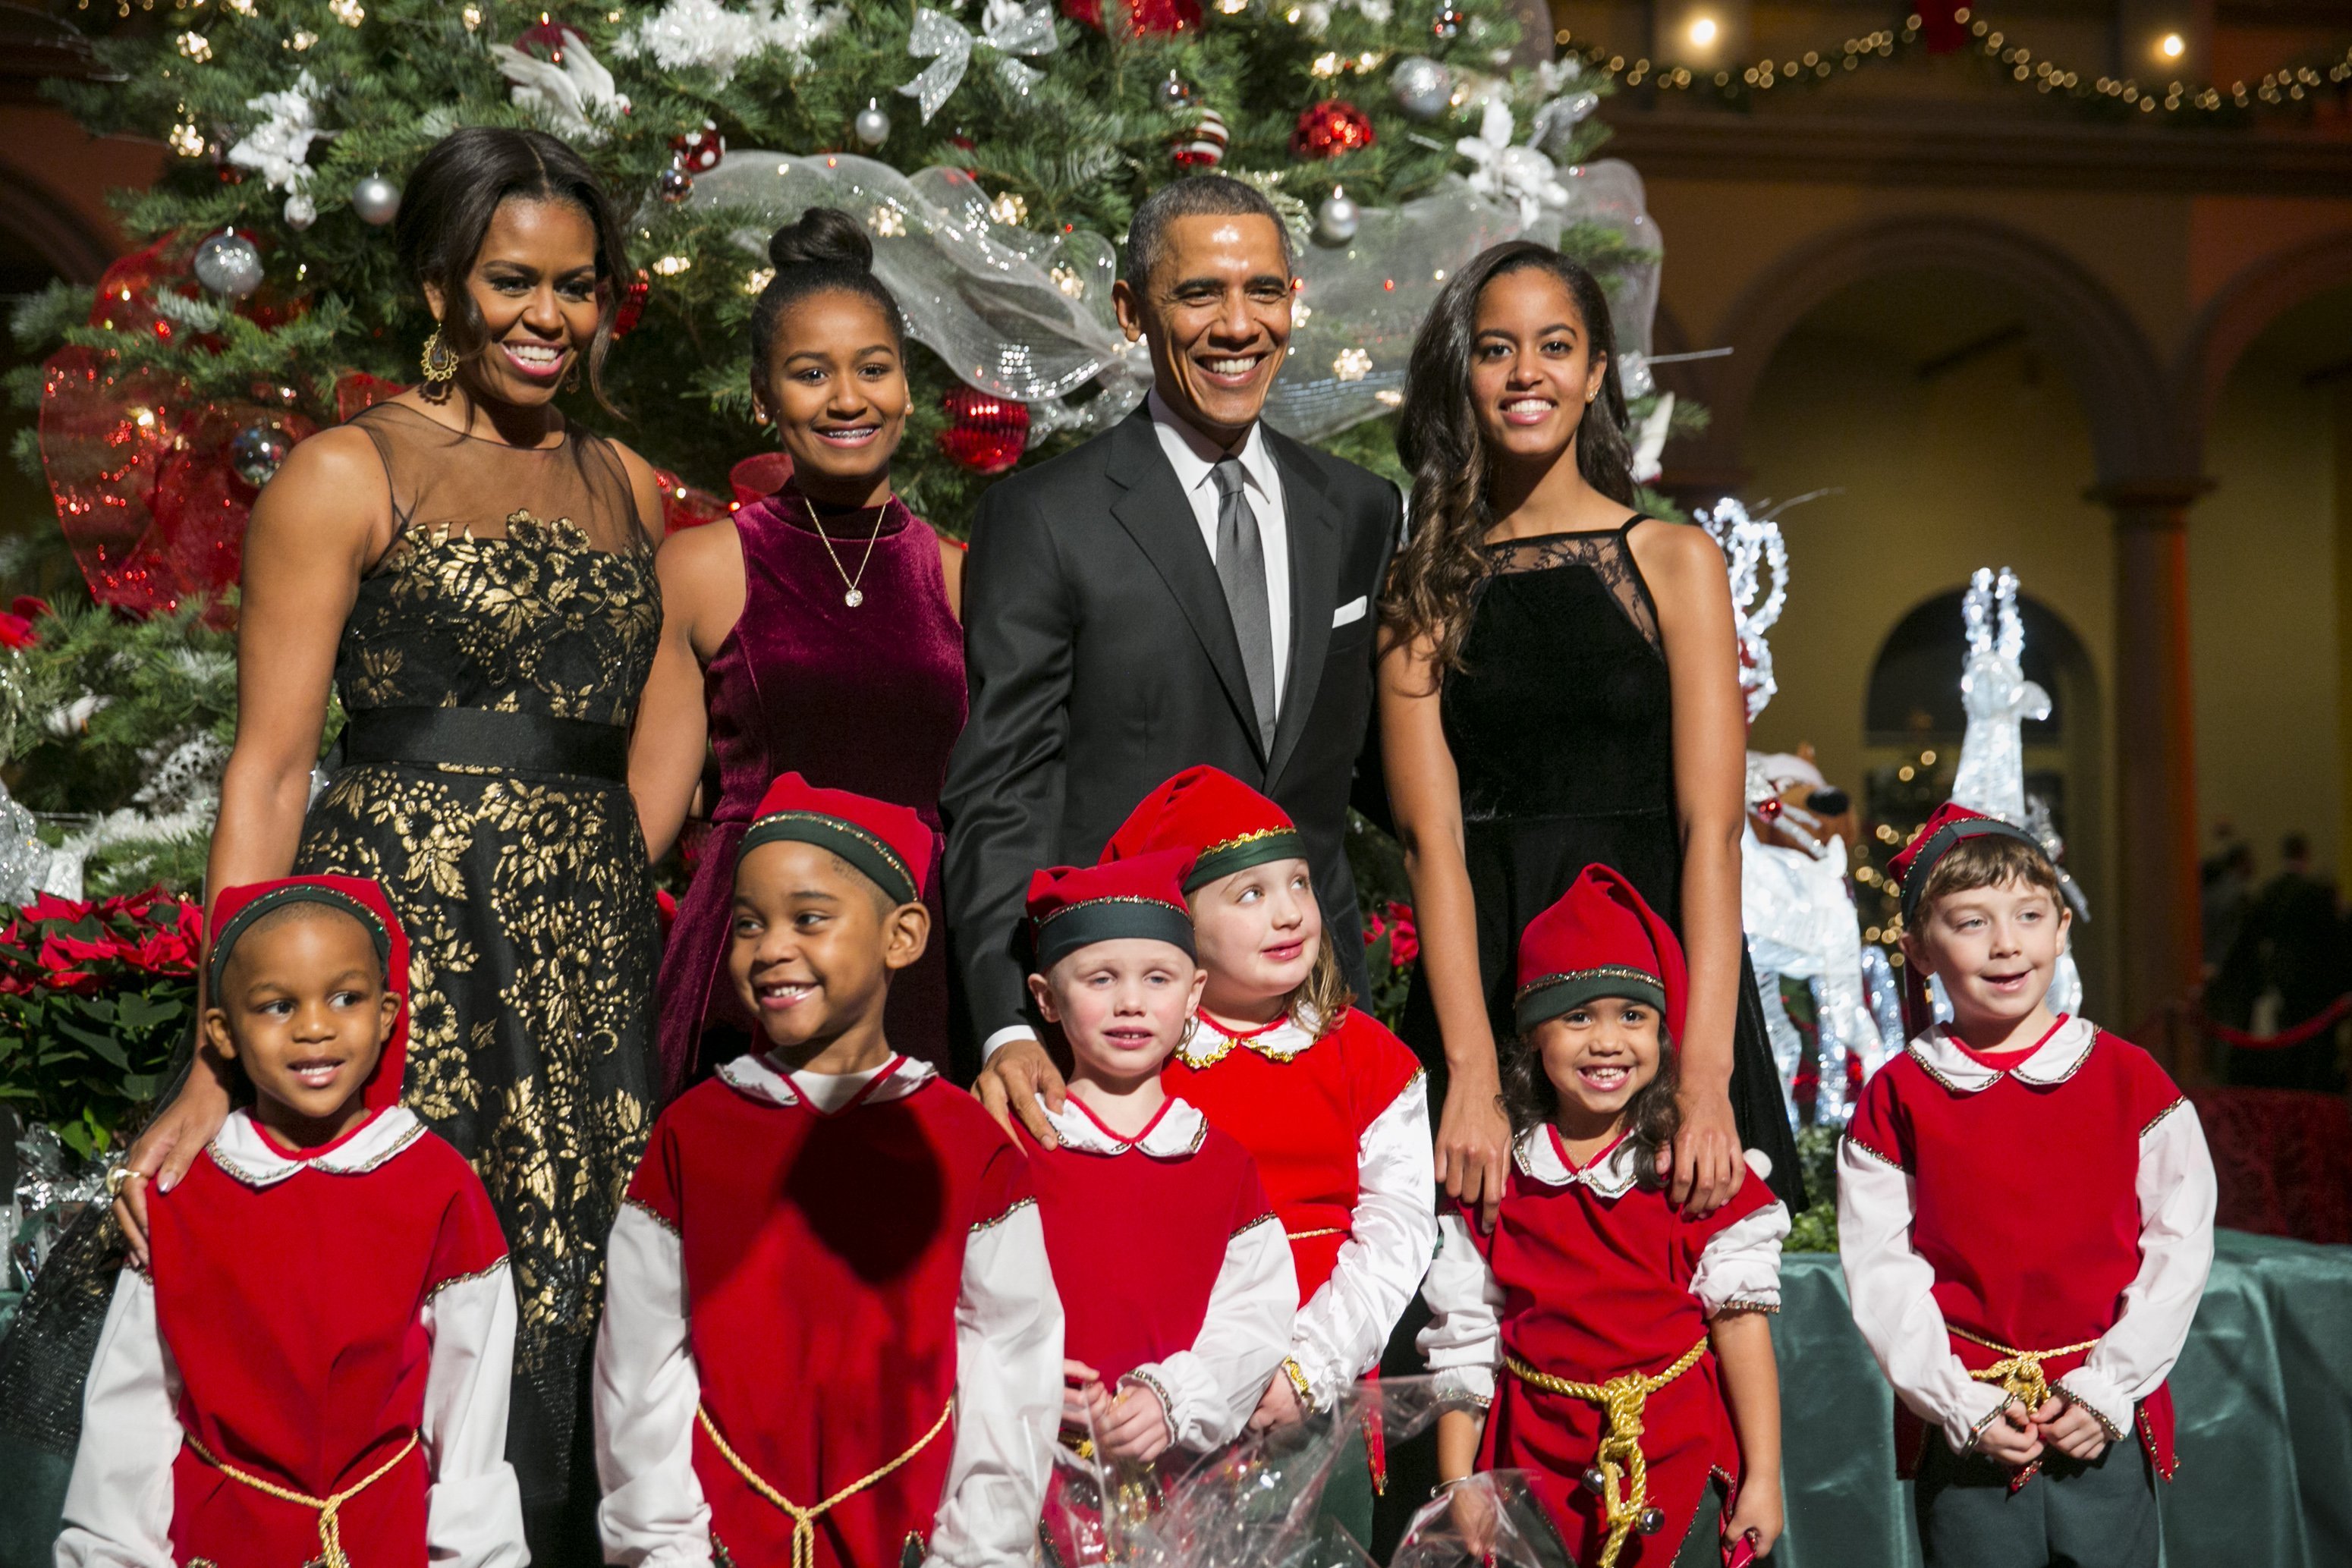 The Obamas at the 'Christmas in Washington' program on Dec. 14, 2014 in Washington, DC. | Photo: Getty Images